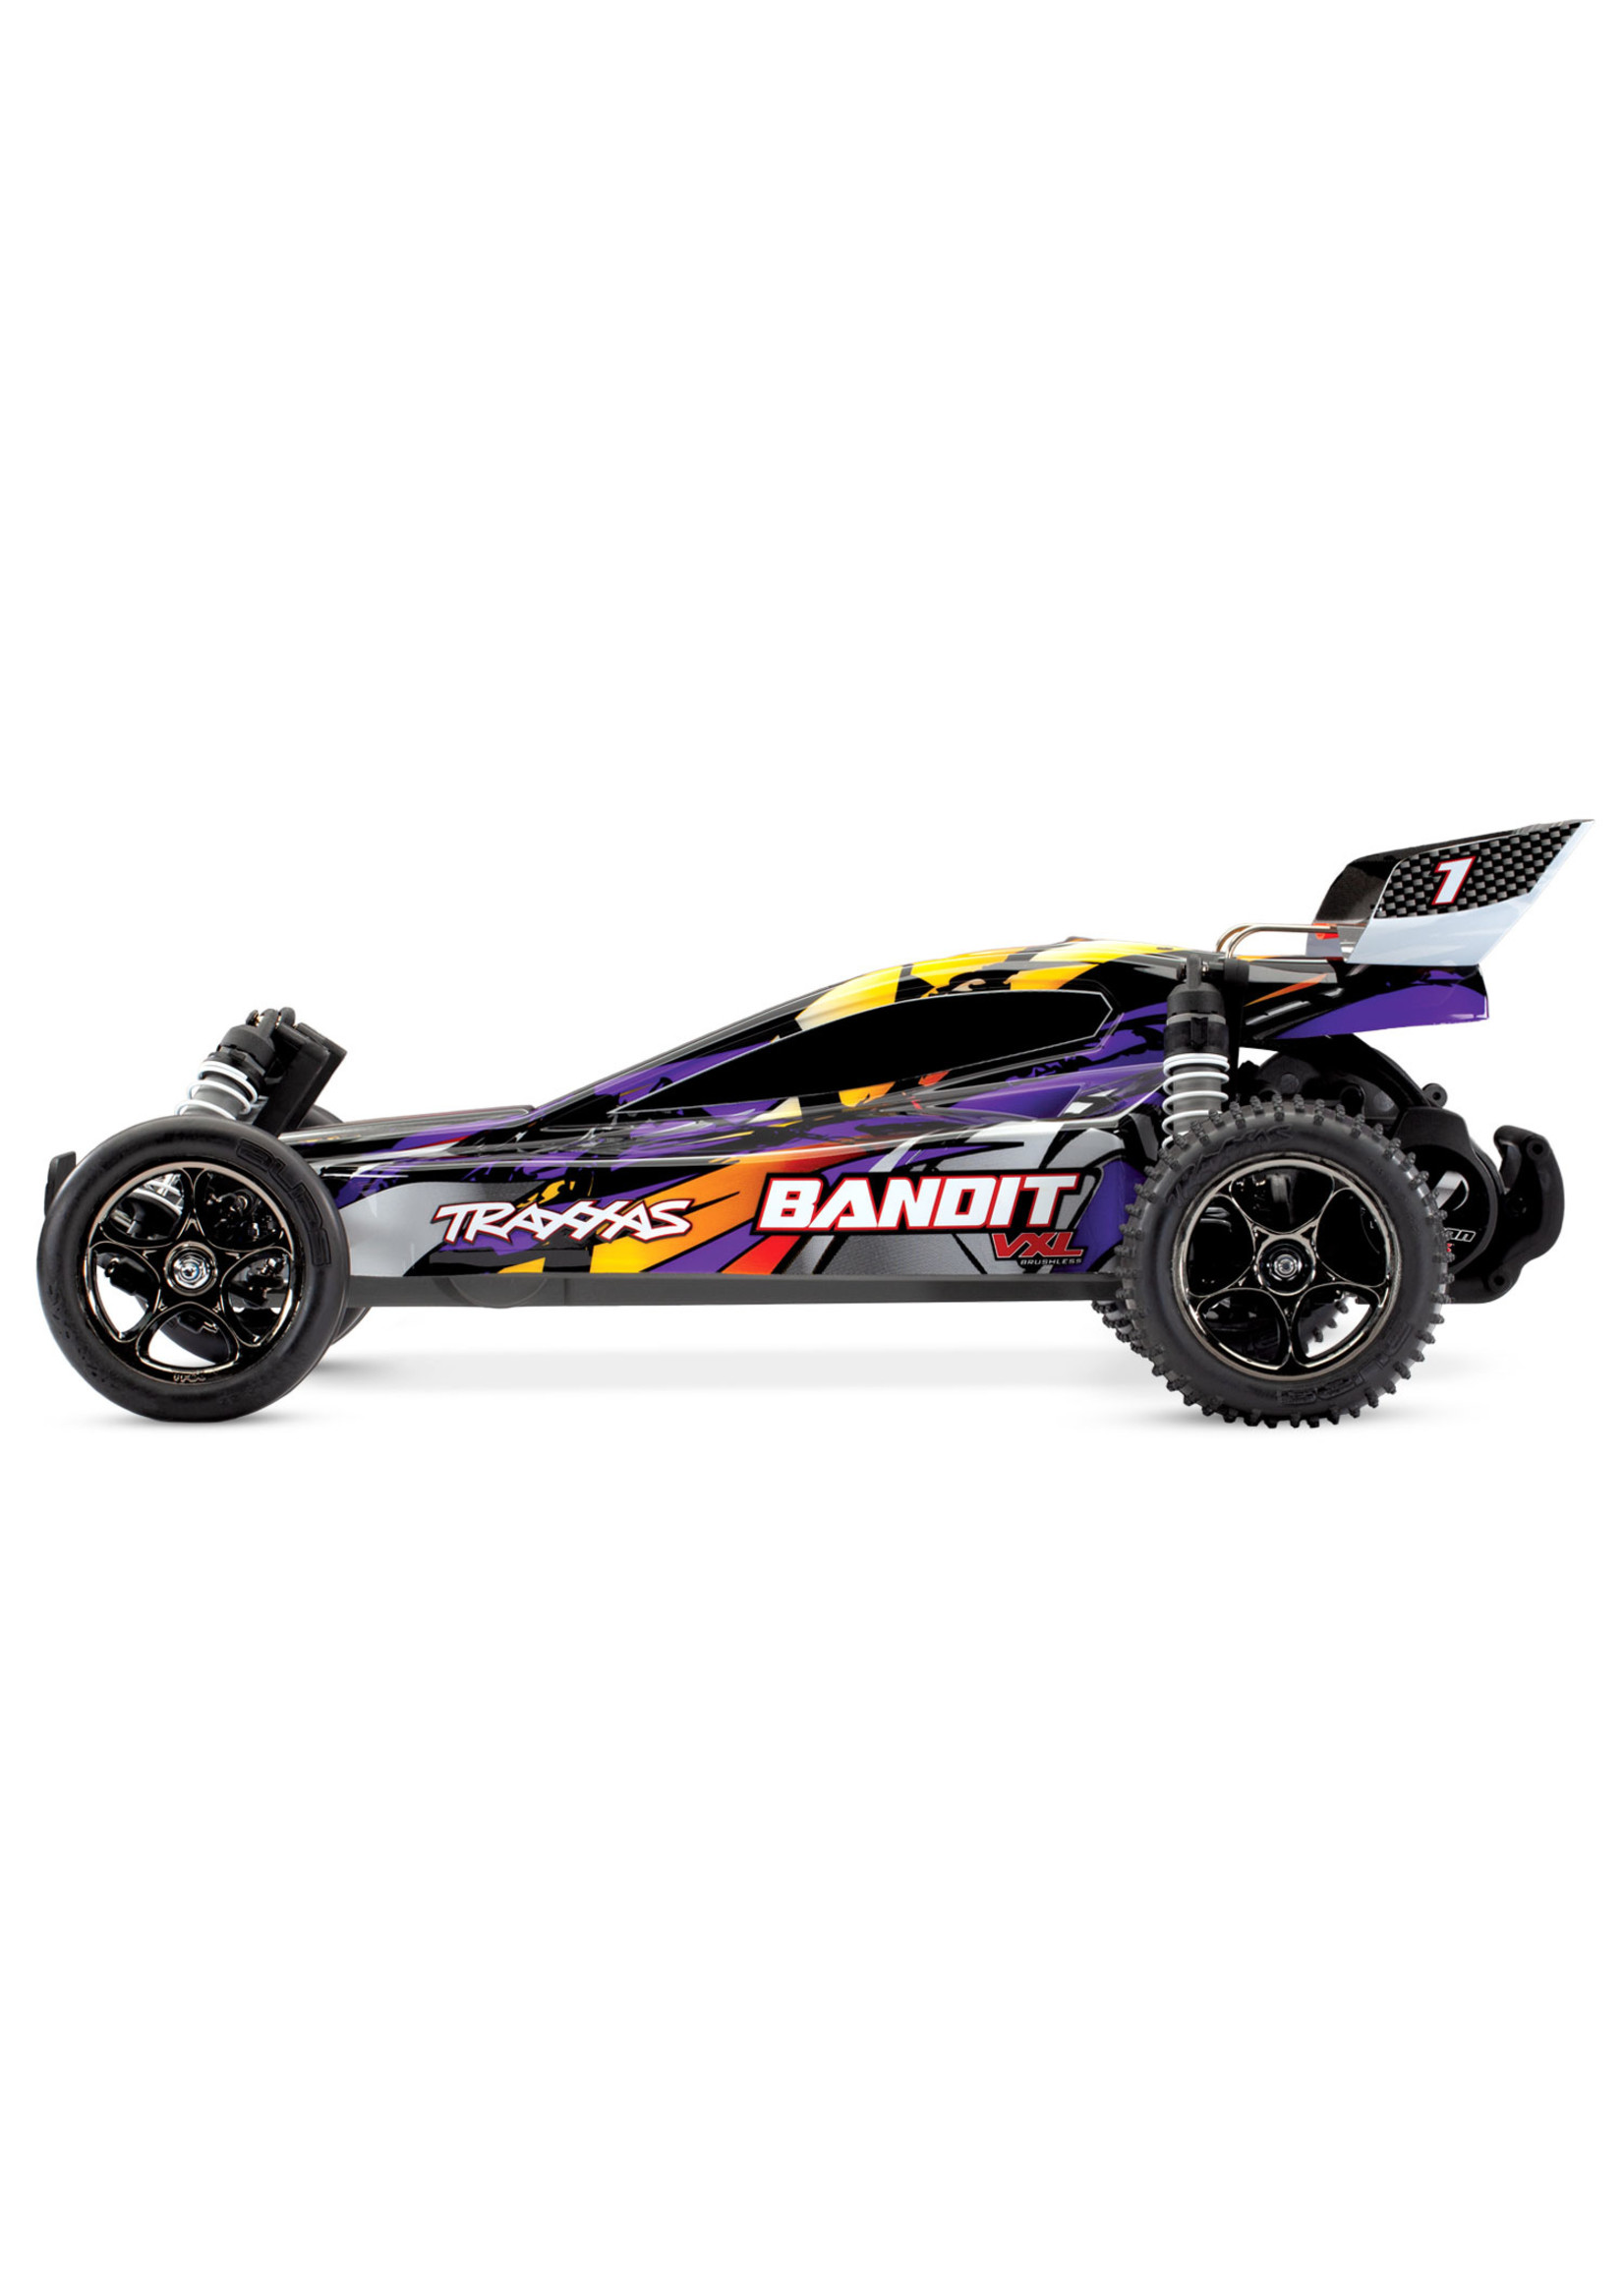 Traxxas 1/10 Bandit VXL RTR Brushless Buggy with TSM - Purple